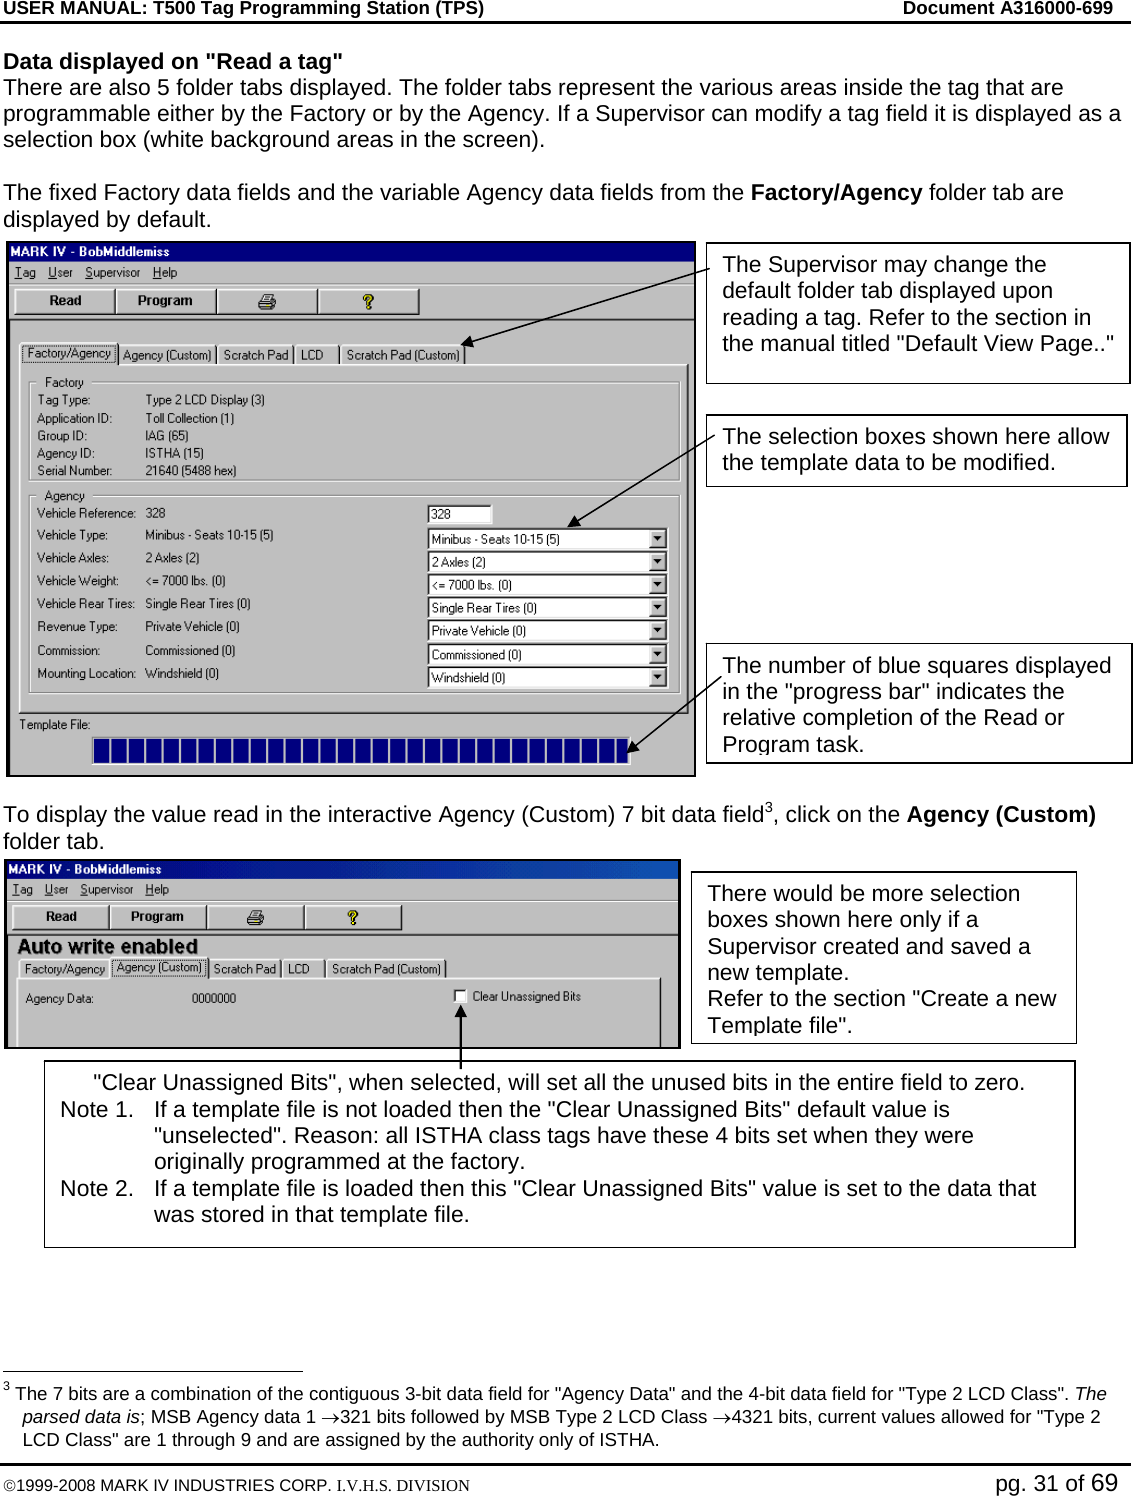 USER MANUAL: T500 Tag Programming Station (TPS)     Document A316000-699  ©1999-2008 MARK IV INDUSTRIES CORP. I.V.H.S. DIVISION   pg. 31 of 69 Data displayed on &quot;Read a tag&quot; There are also 5 folder tabs displayed. The folder tabs represent the various areas inside the tag that are programmable either by the Factory or by the Agency. If a Supervisor can modify a tag field it is displayed as a selection box (white background areas in the screen).  The fixed Factory data fields and the variable Agency data fields from the Factory/Agency folder tab are displayed by default.  To display the value read in the interactive Agency (Custom) 7 bit data field3, click on the Agency (Custom) folder tab.                                                     3 The 7 bits are a combination of the contiguous 3-bit data field for &quot;Agency Data&quot; and the 4-bit data field for &quot;Type 2 LCD Class&quot;. The parsed data is; MSB Agency data 1 →321 bits followed by MSB Type 2 LCD Class →4321 bits, current values allowed for &quot;Type 2 LCD Class&quot; are 1 through 9 and are assigned by the authority only of ISTHA. The selection boxes shown here allow the template data to be modified.  The Supervisor may change the default folder tab displayed upon reading a tag. Refer to the section in the manual titled &quot;Default View Page..&quot; The number of blue squares displayed in the &quot;progress bar&quot; indicates the relative completion of the Read or Program task. There would be more selection boxes shown here only if a Supervisor created and saved a new template. Refer to the section &quot;Create a new Template file&quot;. &quot;Clear Unassigned Bits&quot;, when selected, will set all the unused bits in the entire field to zero. Note 1.  If a template file is not loaded then the &quot;Clear Unassigned Bits&quot; default value is &quot;unselected&quot;. Reason: all ISTHA class tags have these 4 bits set when they were originally programmed at the factory. Note 2.  If a template file is loaded then this &quot;Clear Unassigned Bits&quot; value is set to the data that was stored in that template file. 